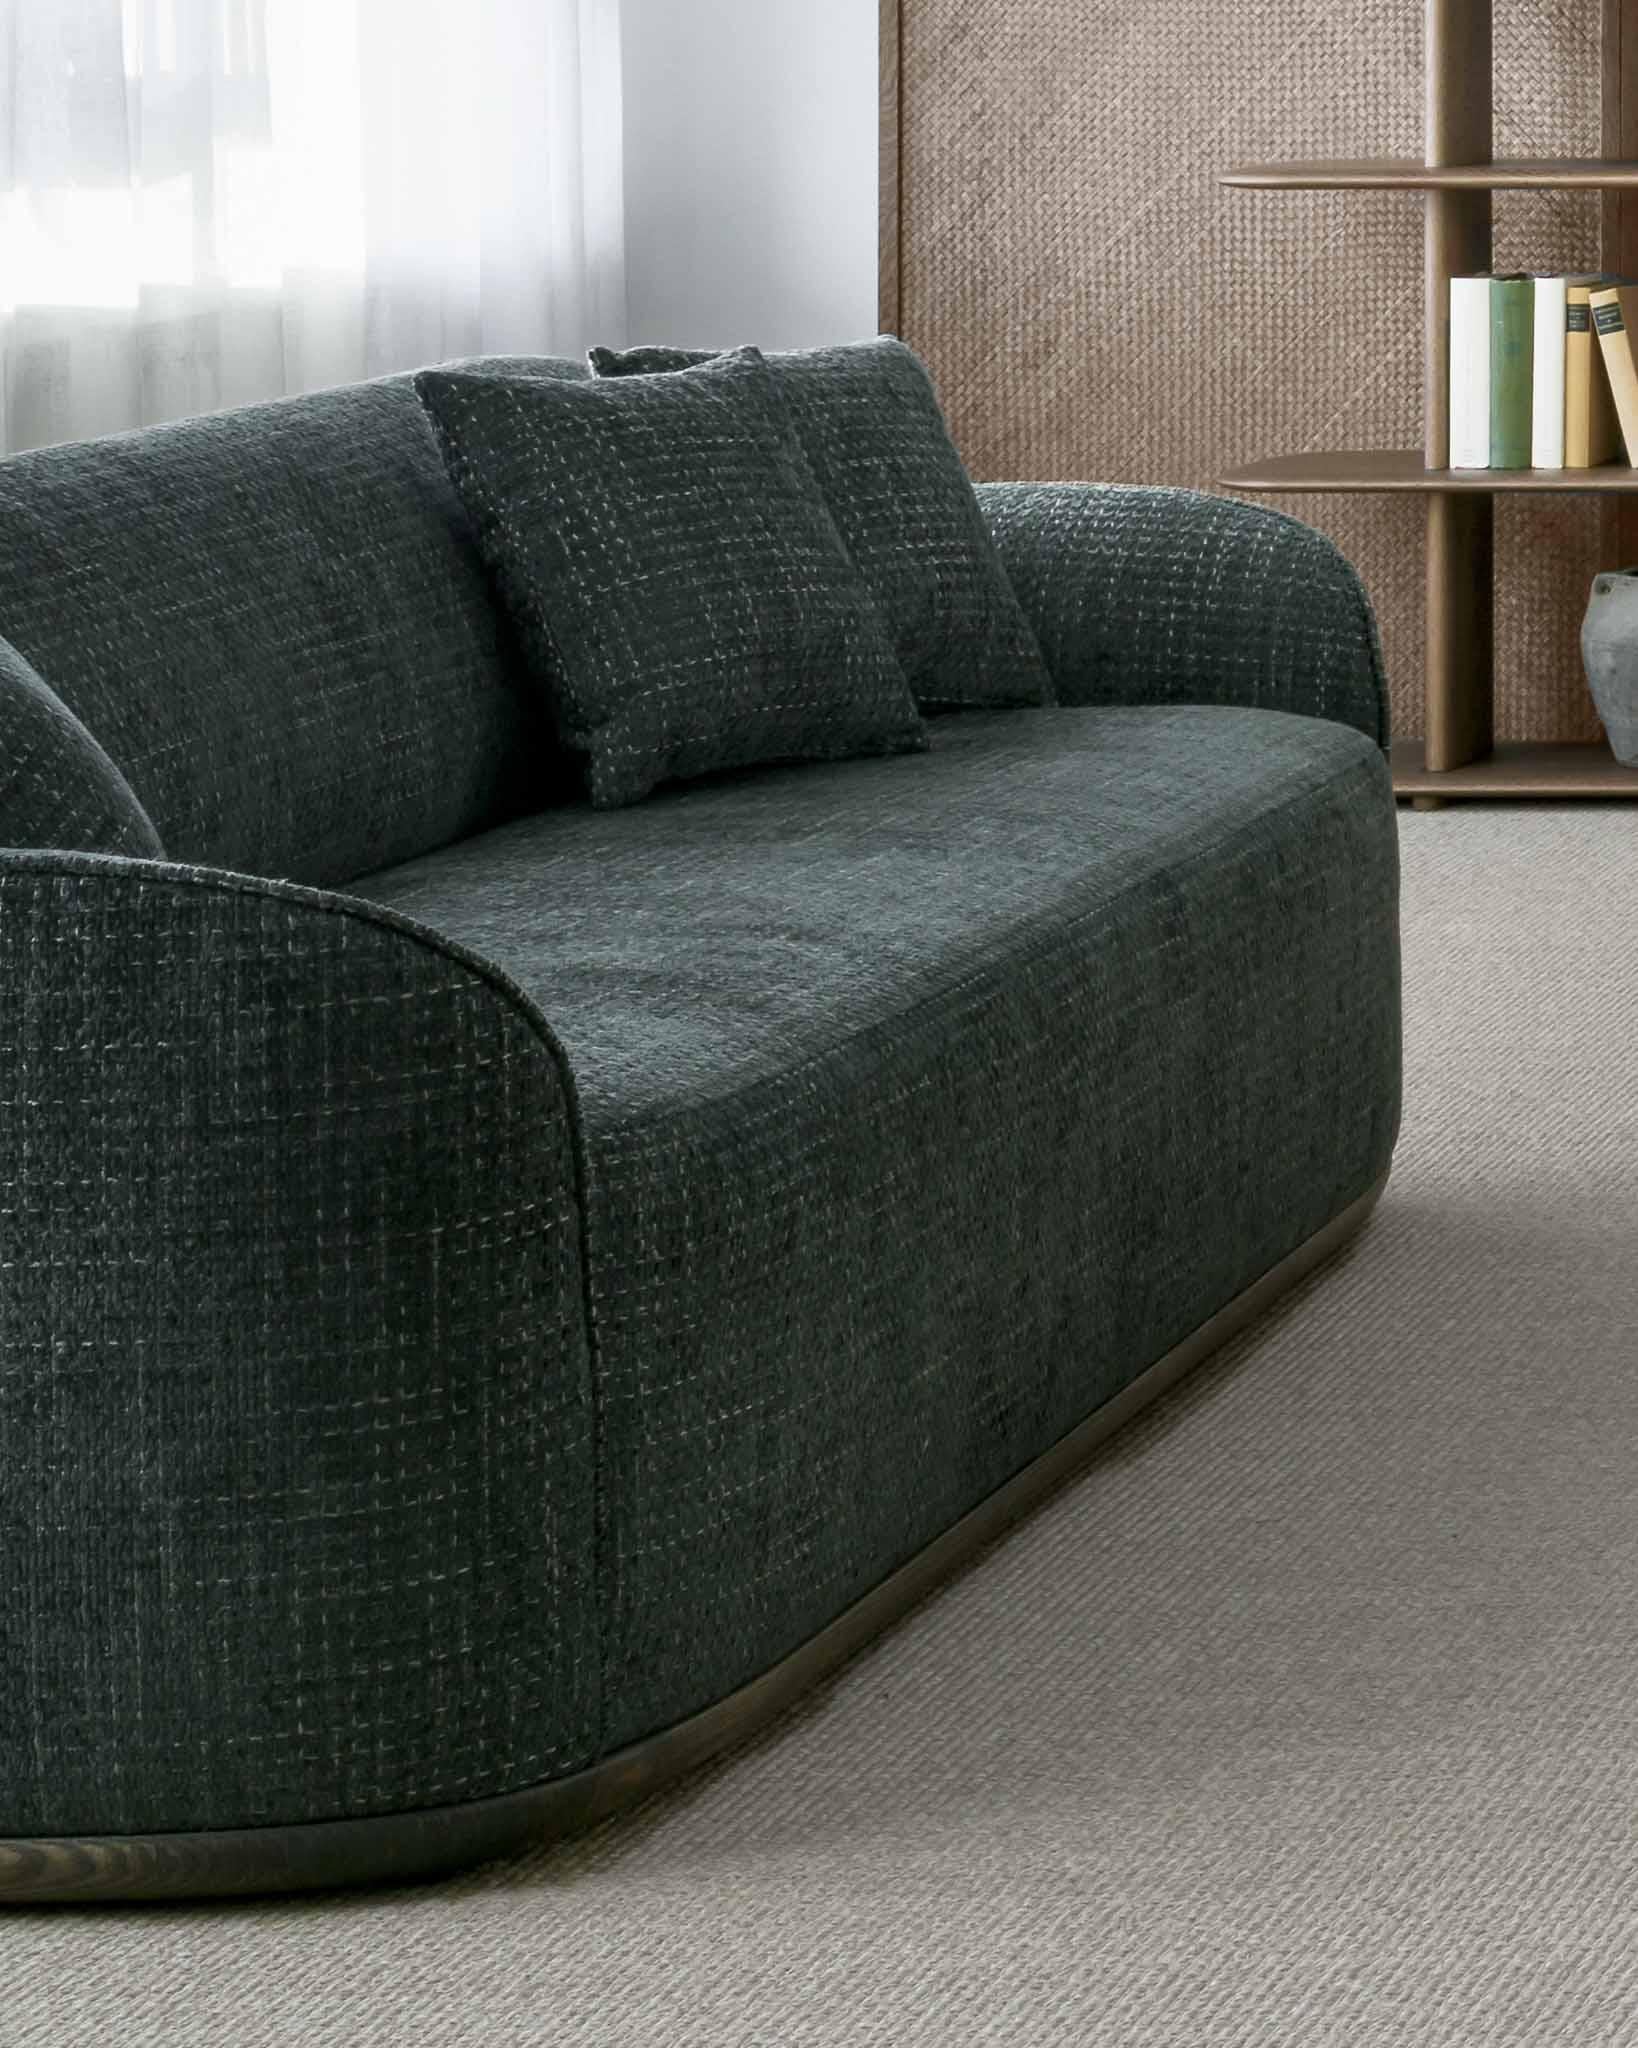 Unio Sofa Upholstered with Dedar Pergamena Fabric by Poiat For Sale 2